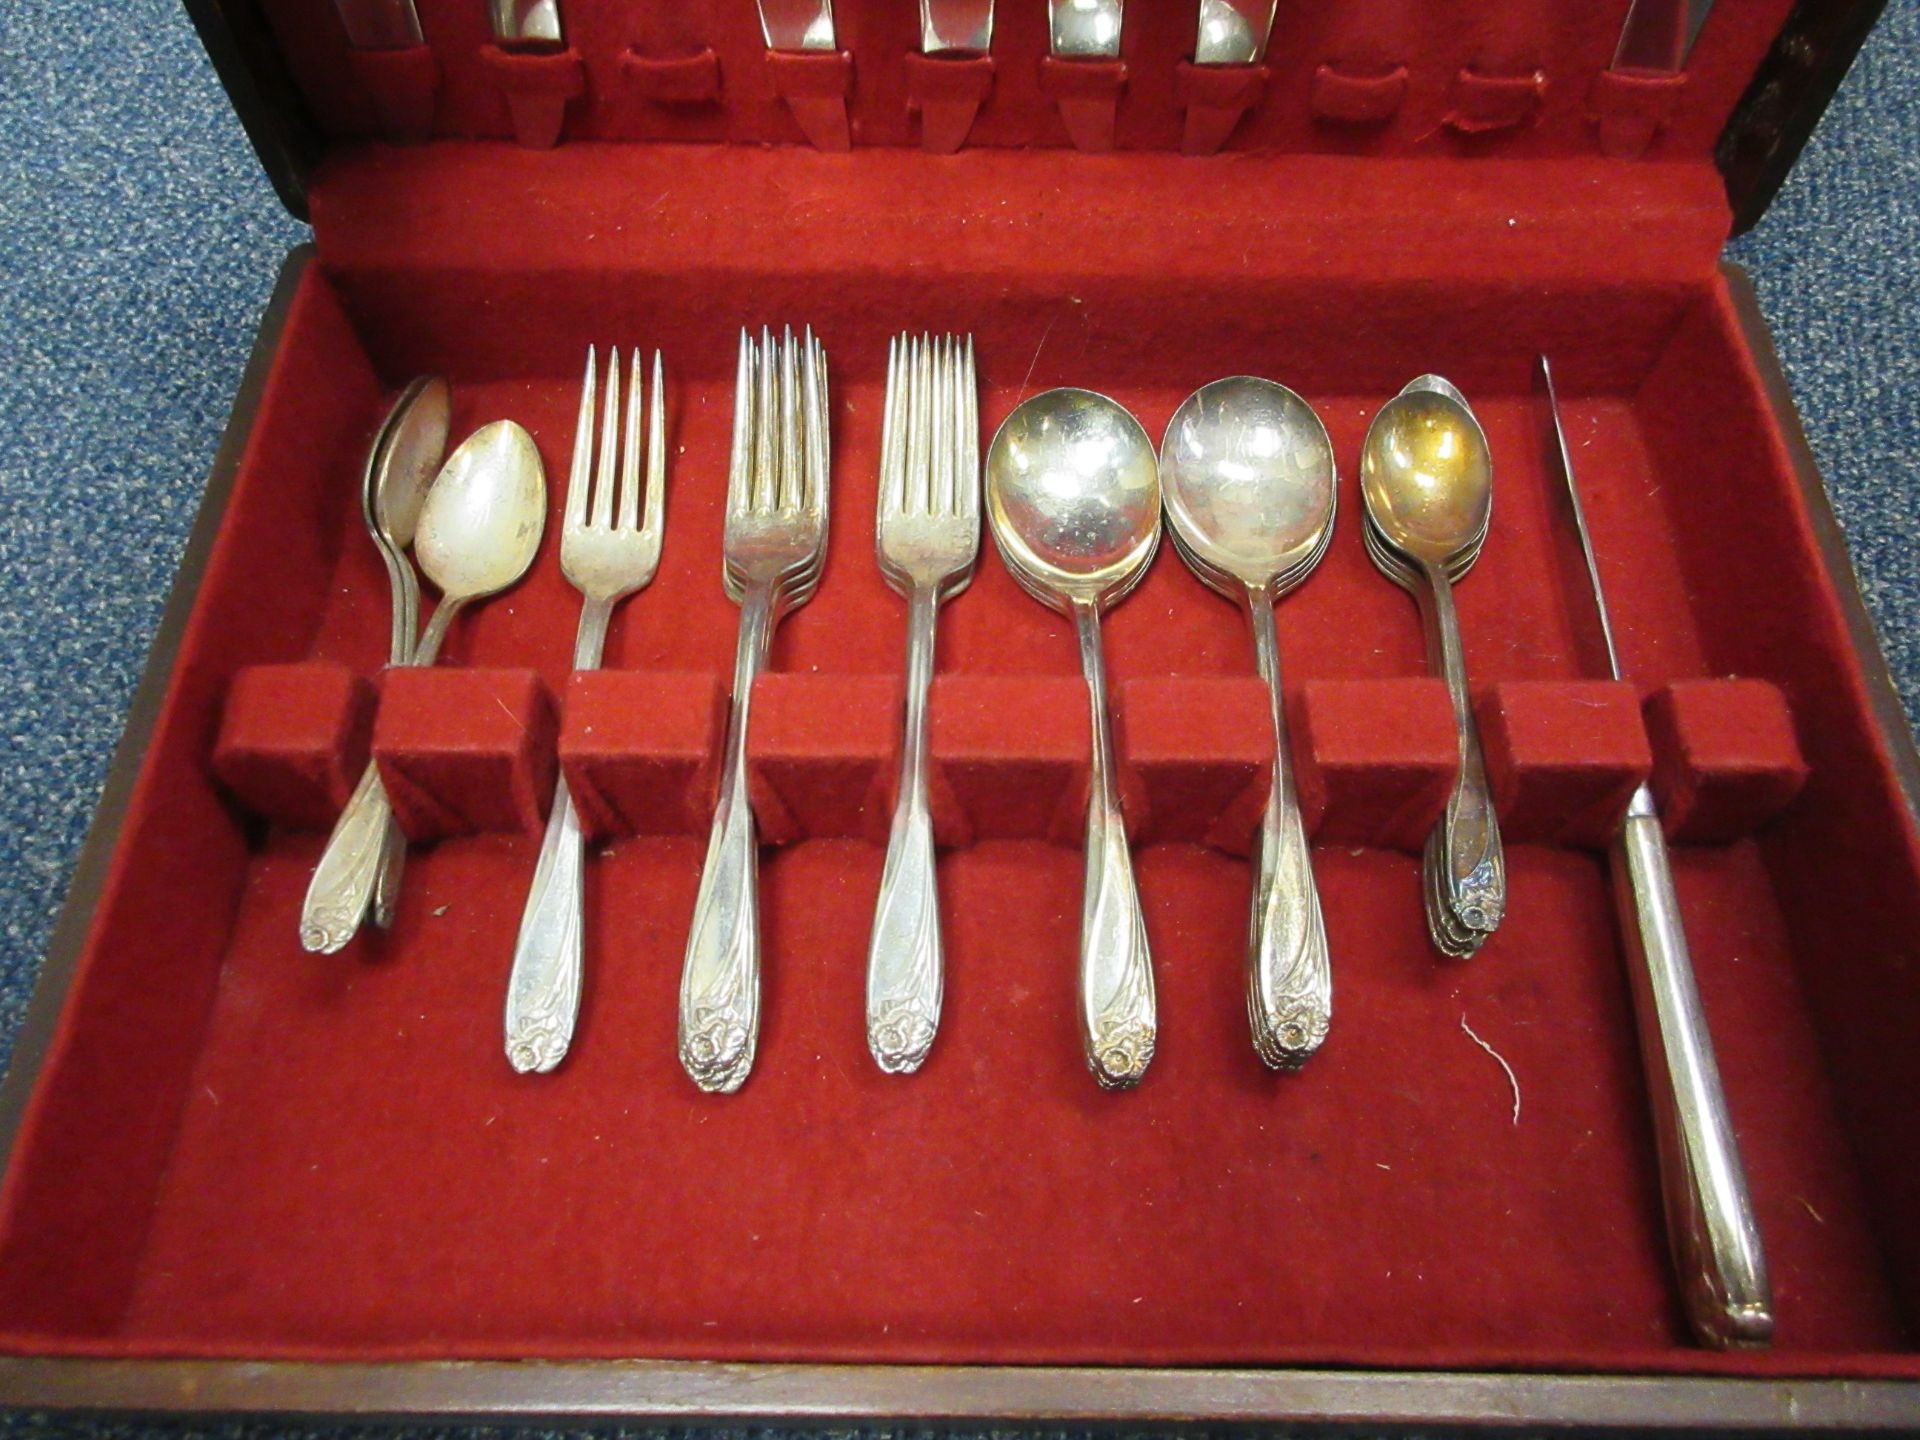 ANTIQUE SILVERWARE SET COMES IN WOODEN BOX - 31 PIECES + BOX - Image 2 of 3